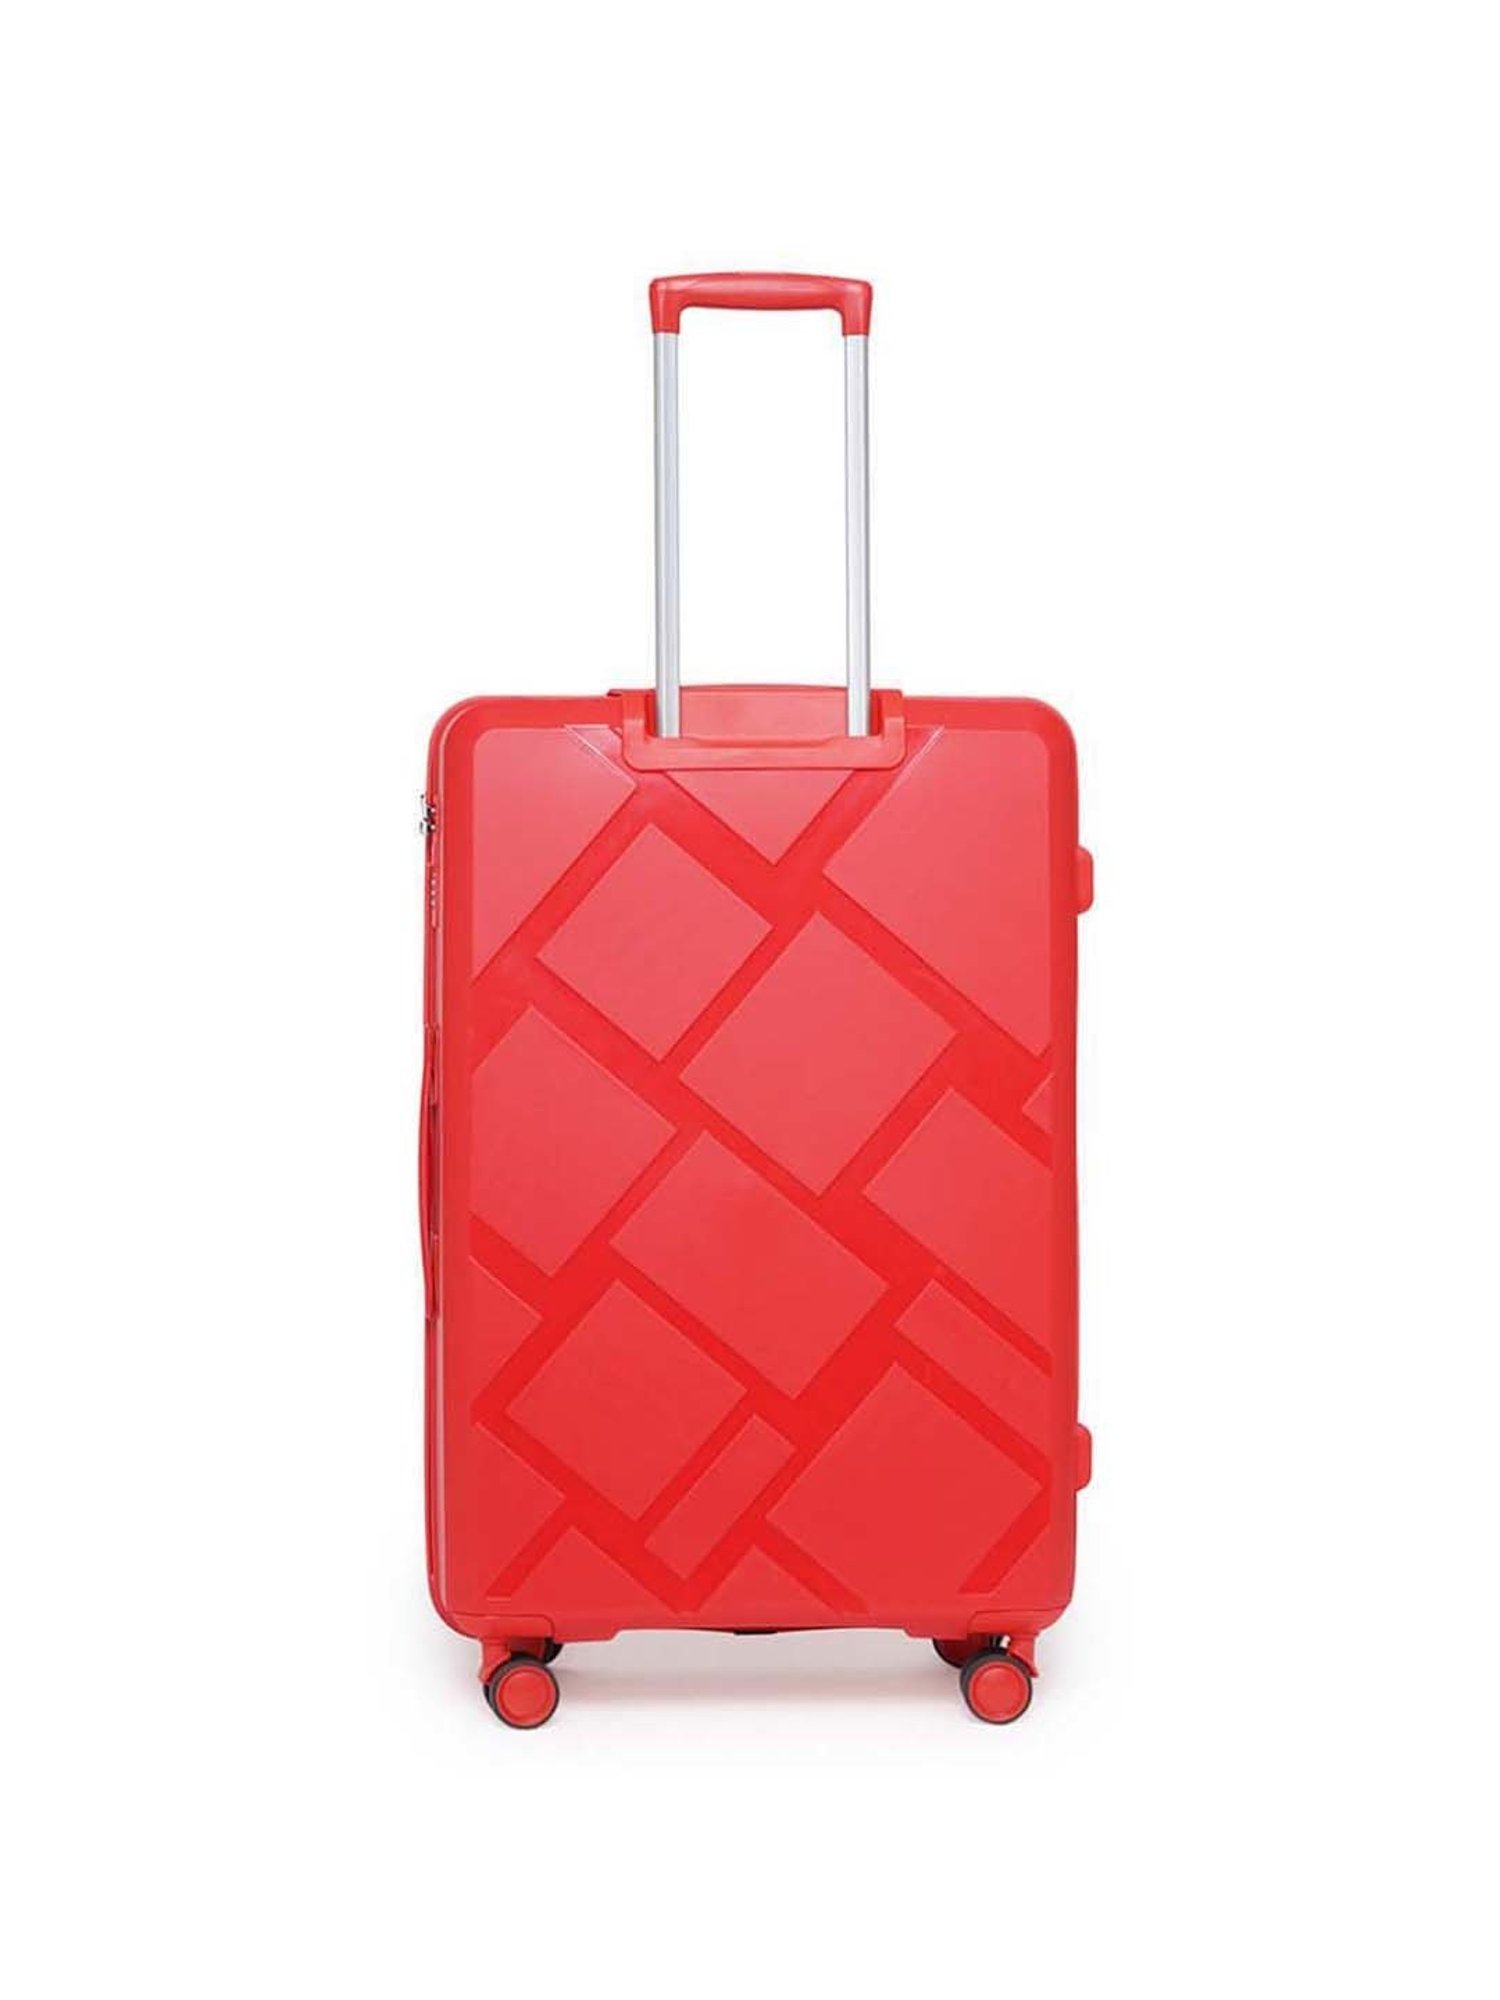 Provogue 55 cm Cabin Trolley  Suitcase  Cabin Luggage  Scarlet Red   Fortune Mart